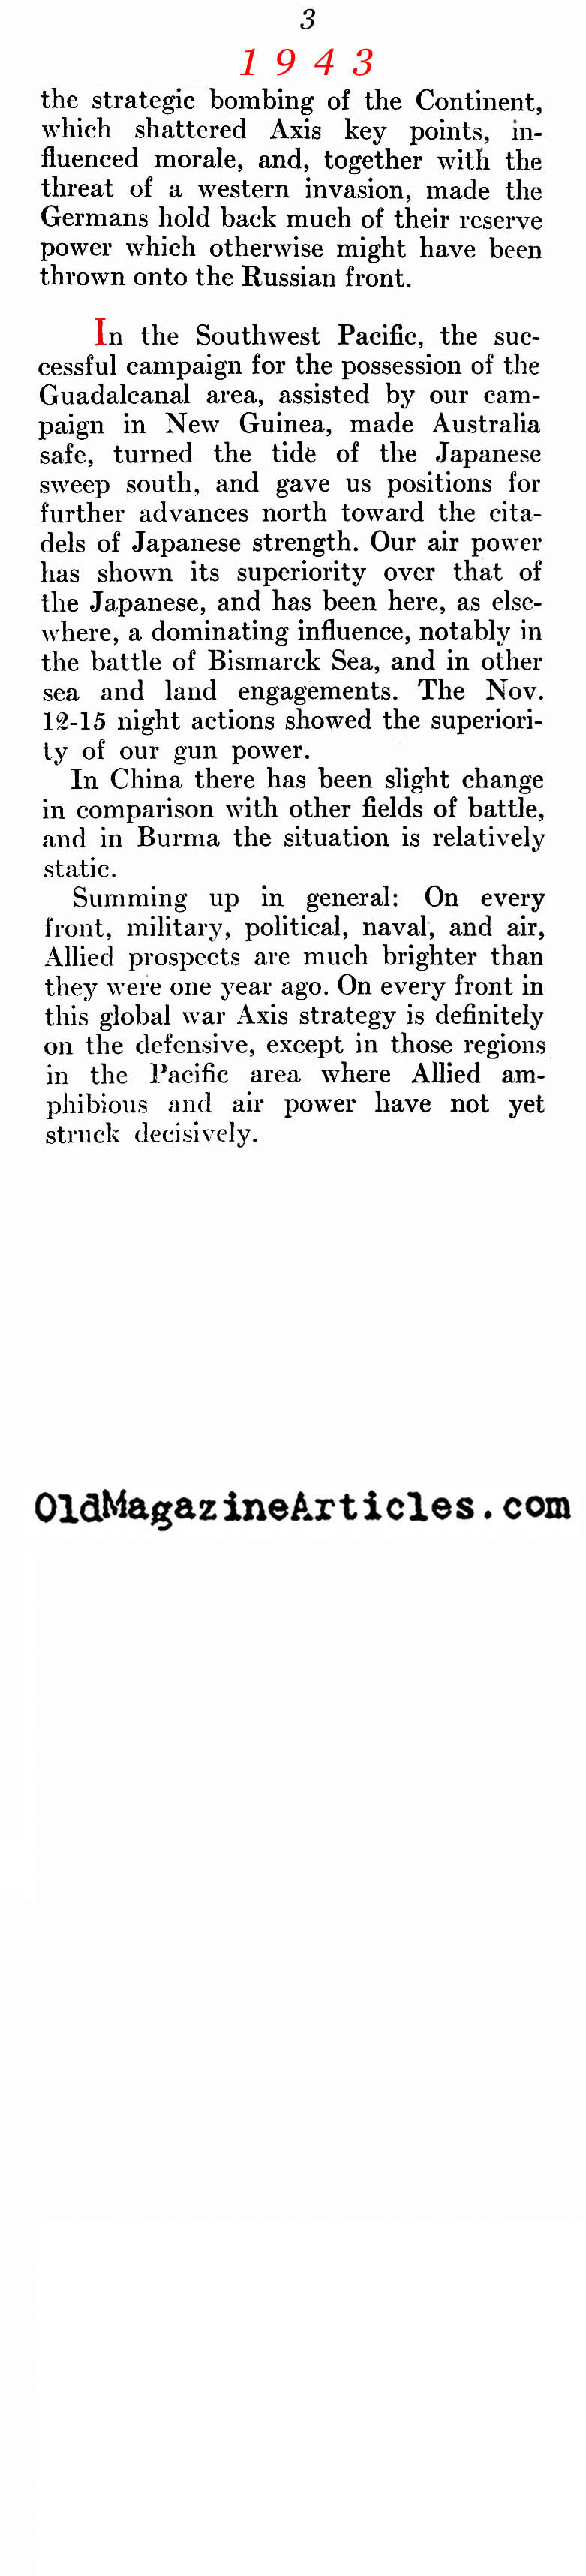 1943: The Year Everything Changed for the Allies (Newsweek Magazine, 1943)